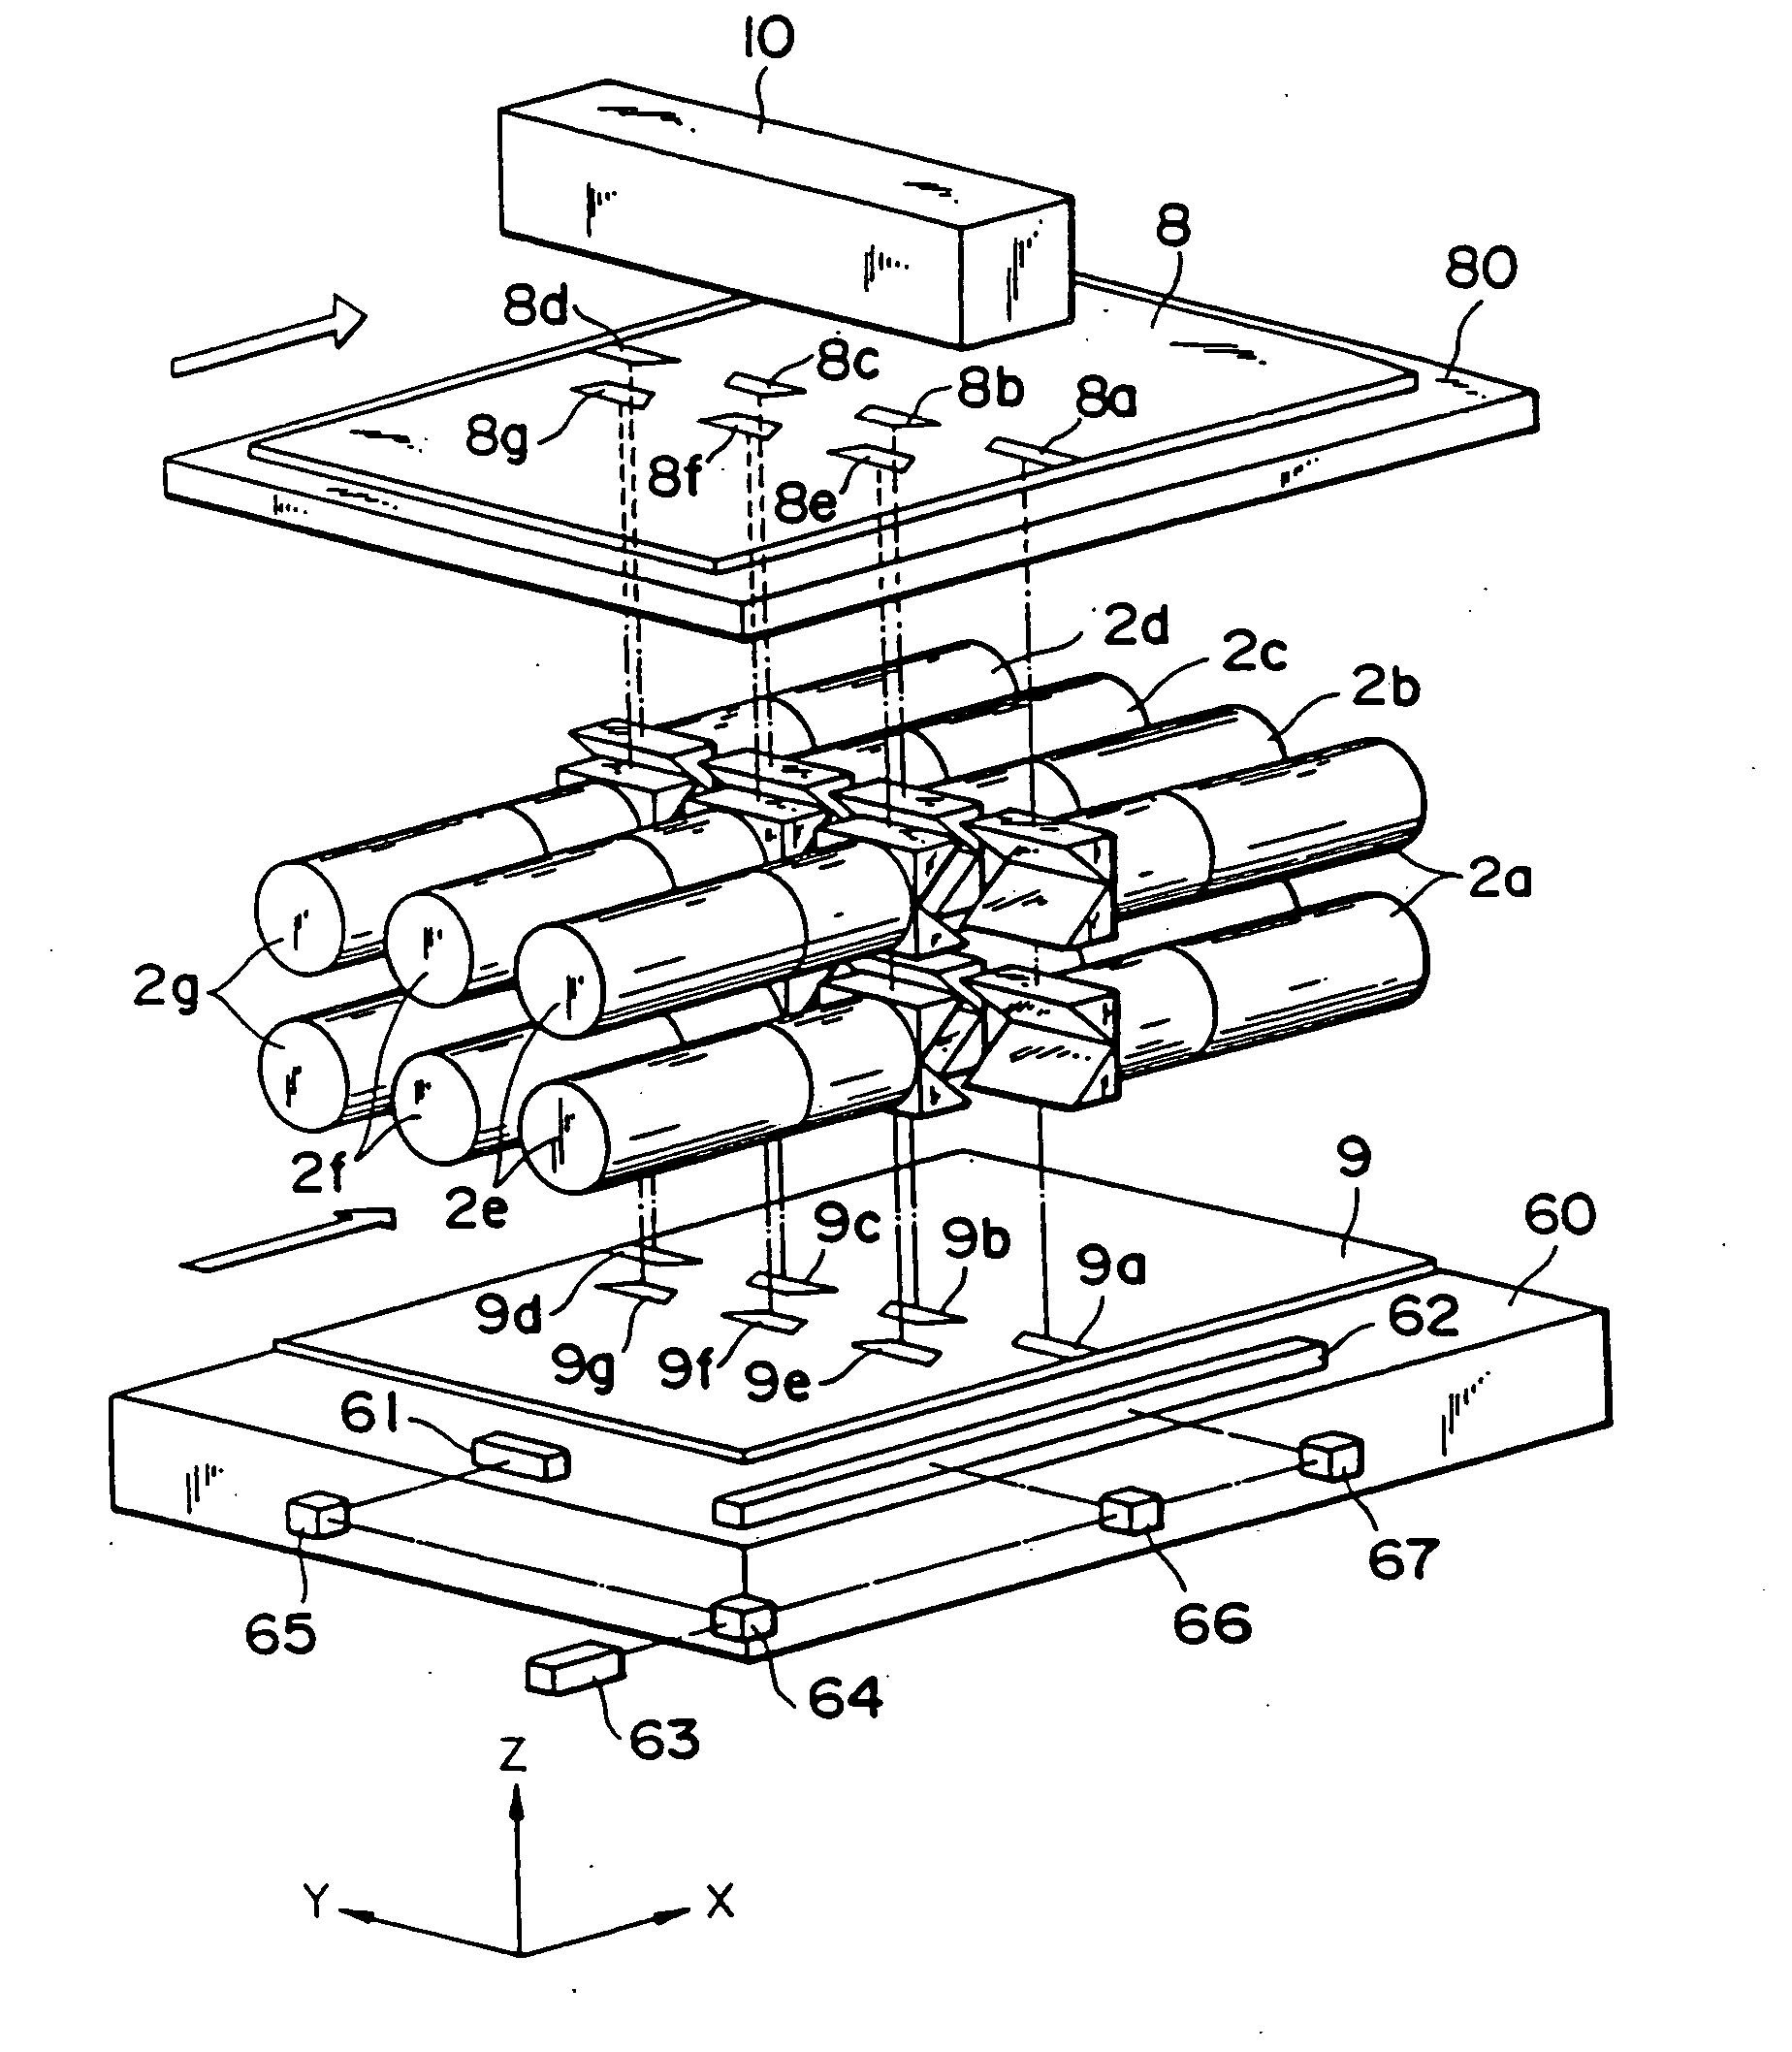 Exposure apparatus, optical projection apparatus and a method for adjusting the optical projection apparatus